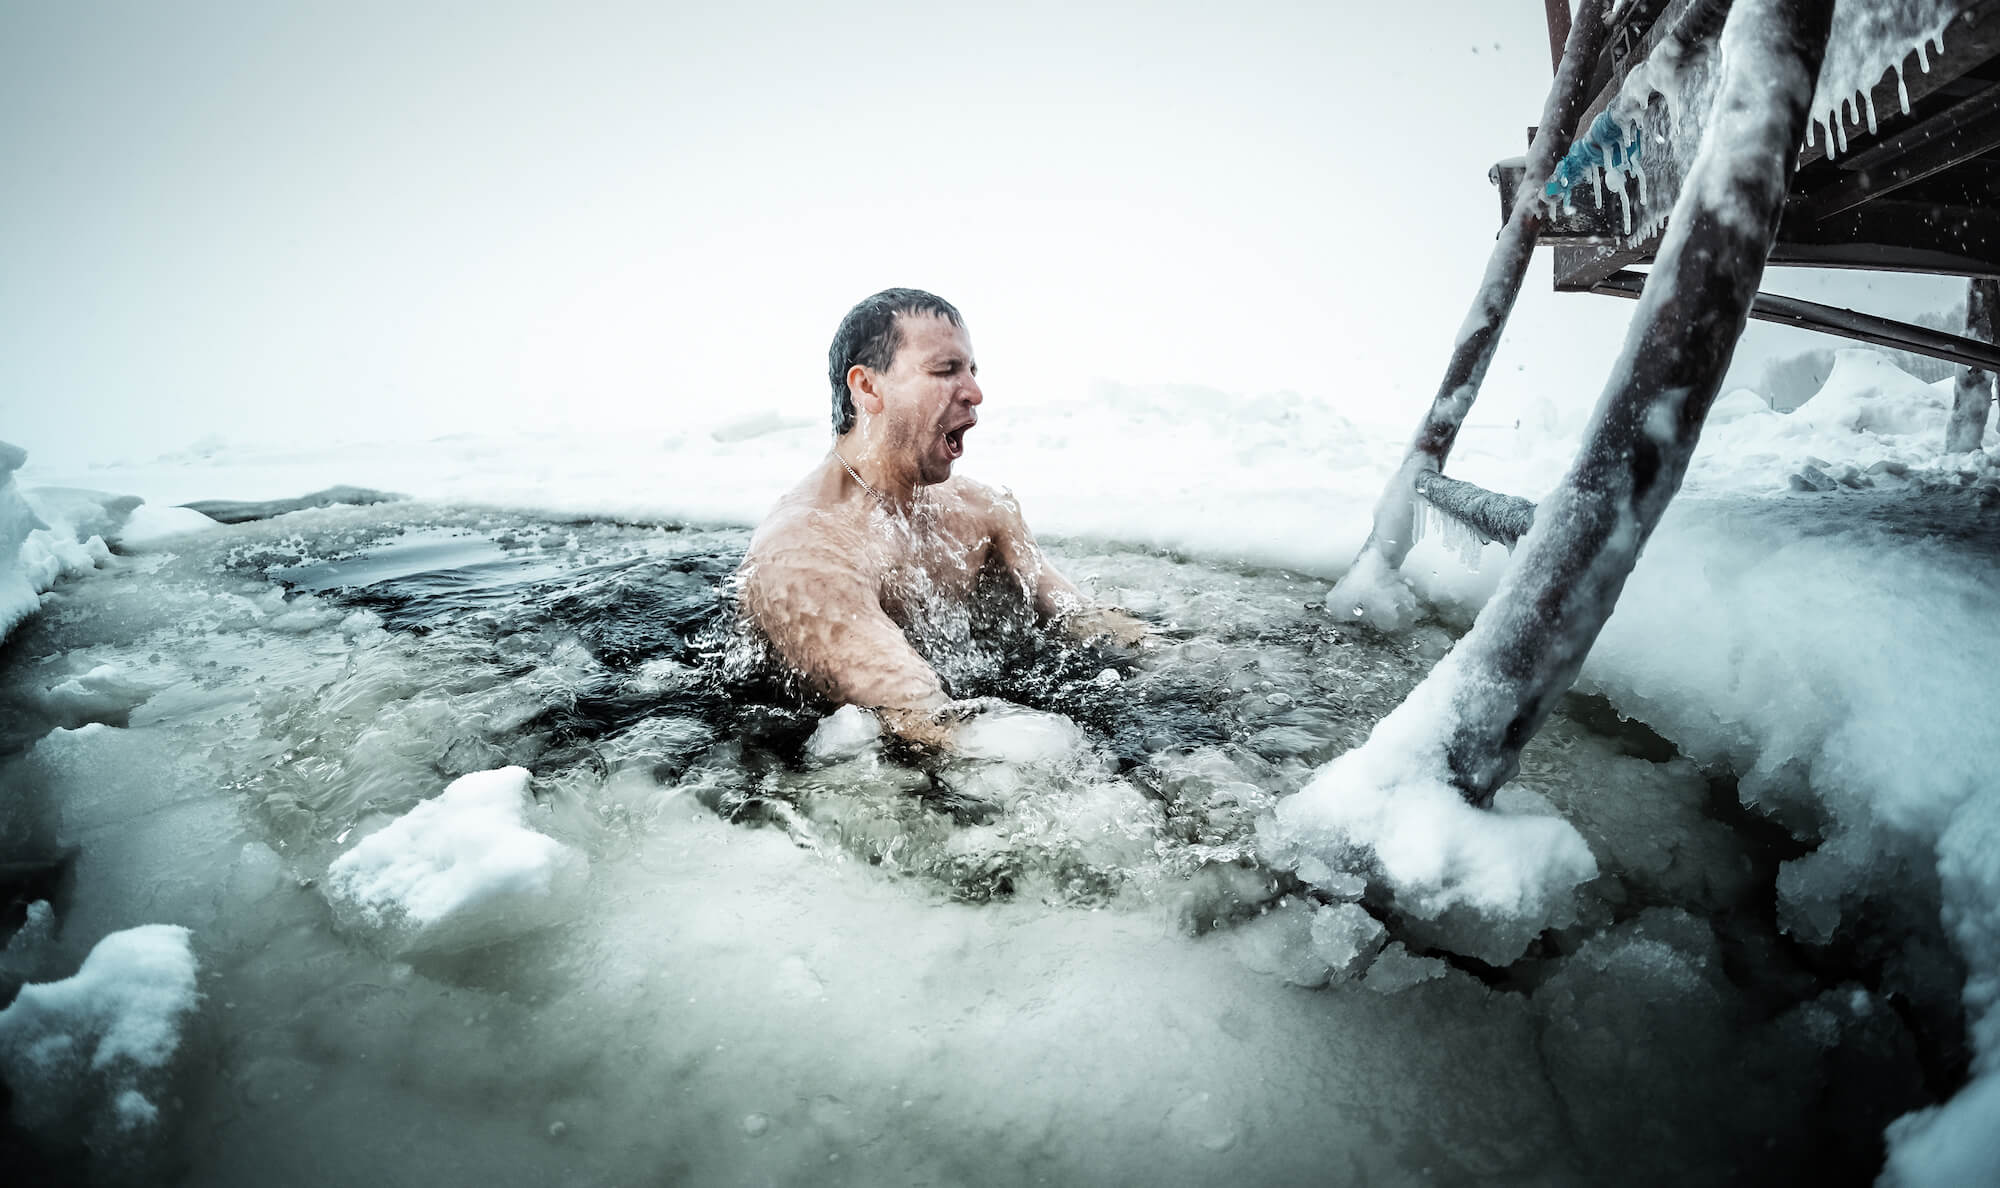 The Benefits of Ice Baths and Cold Plunges